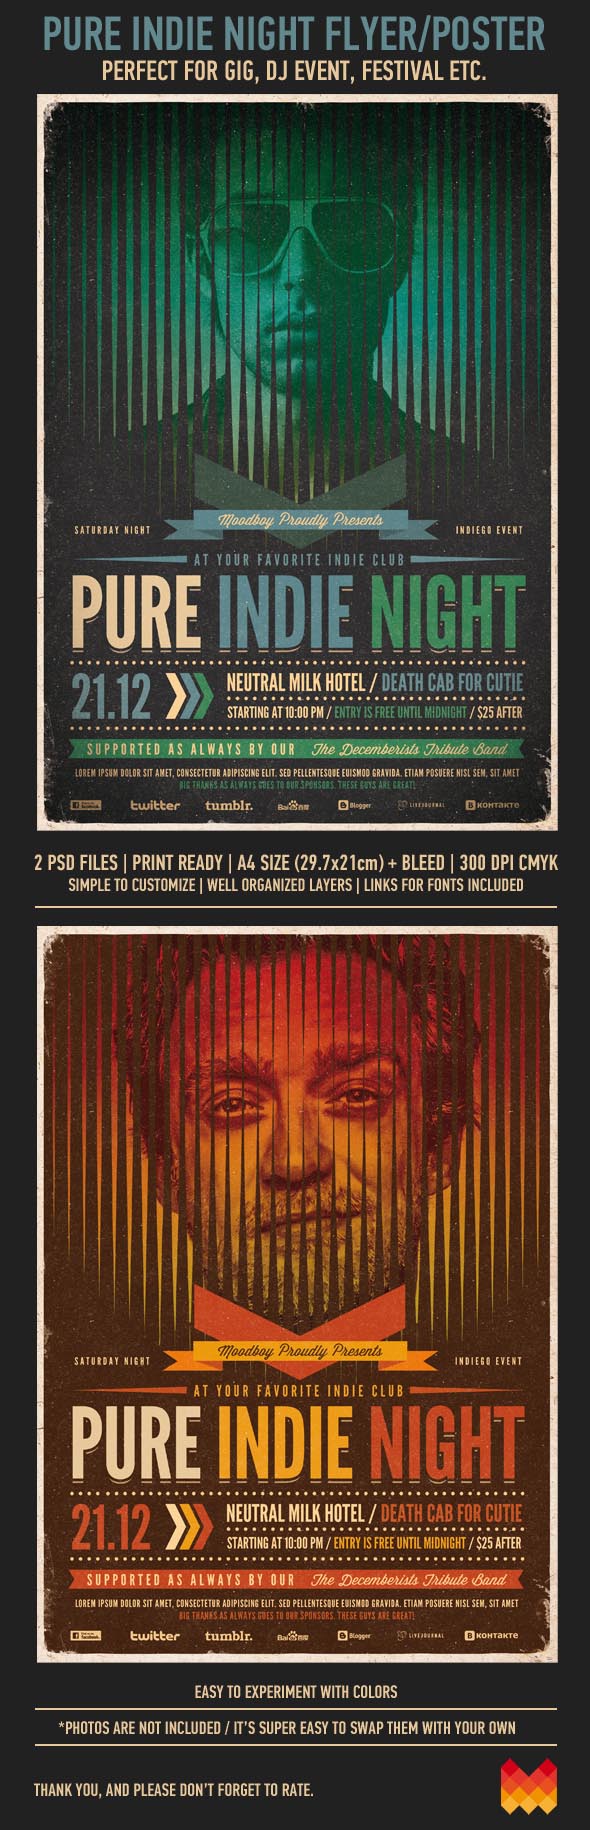 Pure Indie Night Flyer and Poster Design by moodboy